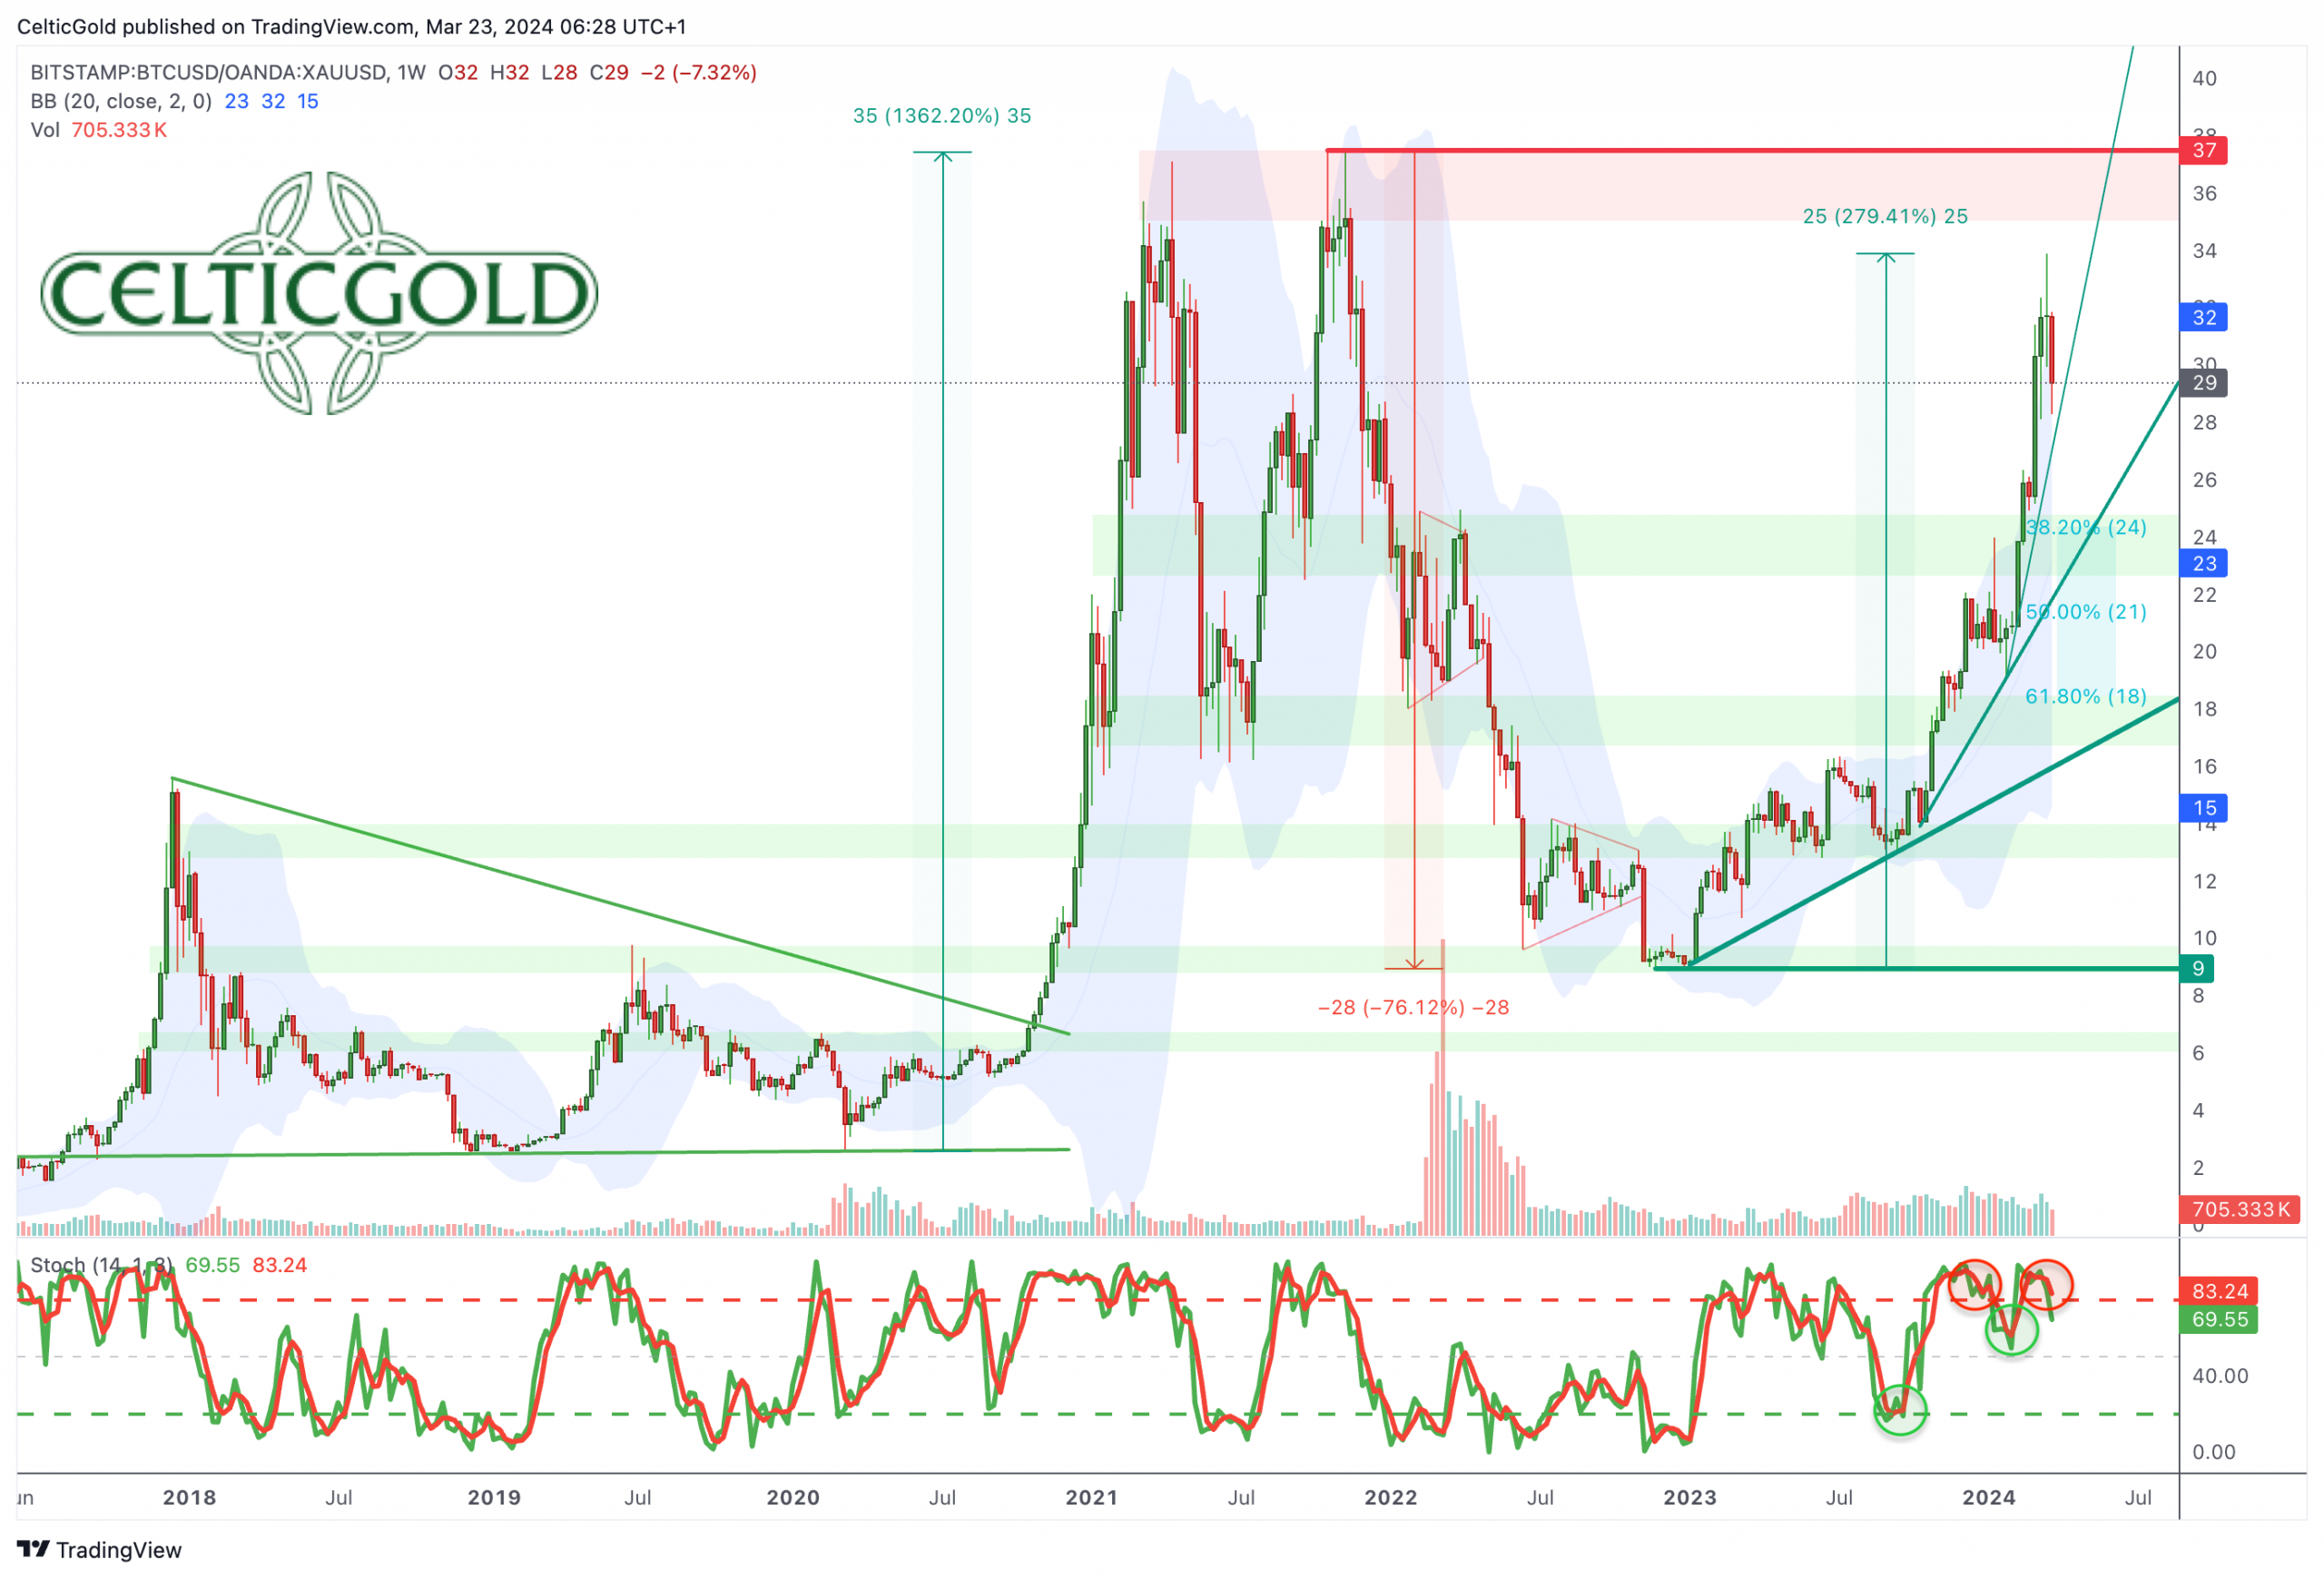 Bitcoin/Gold-Ratio, weekly chart as of March 23rd, 2024